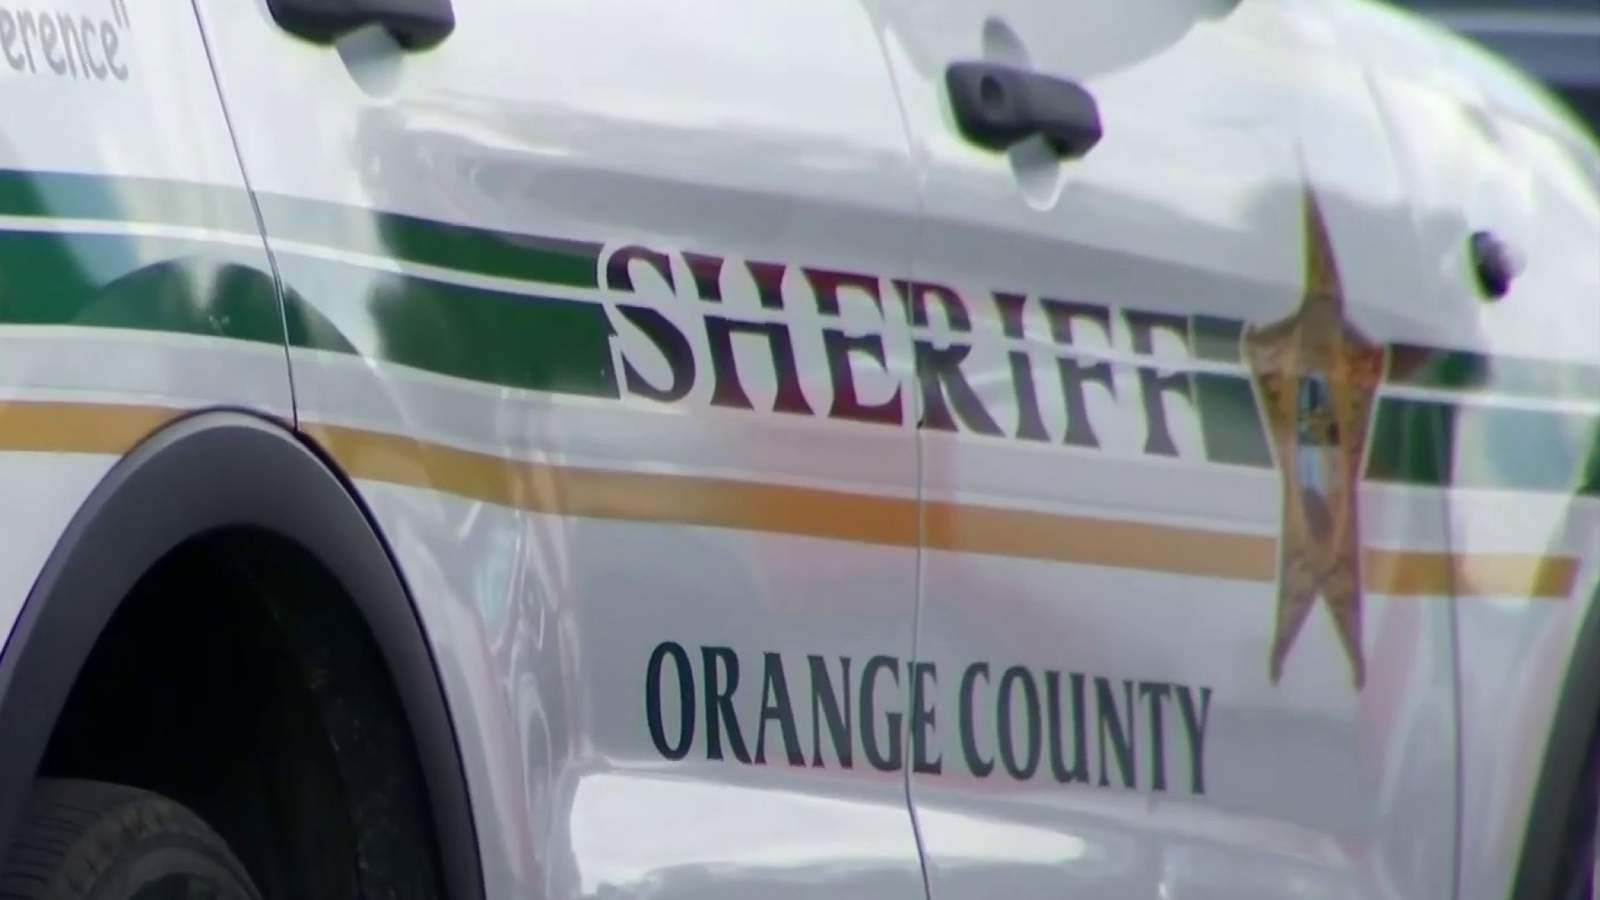 Orange County sheriff’s deputy arrested on child abuse charges